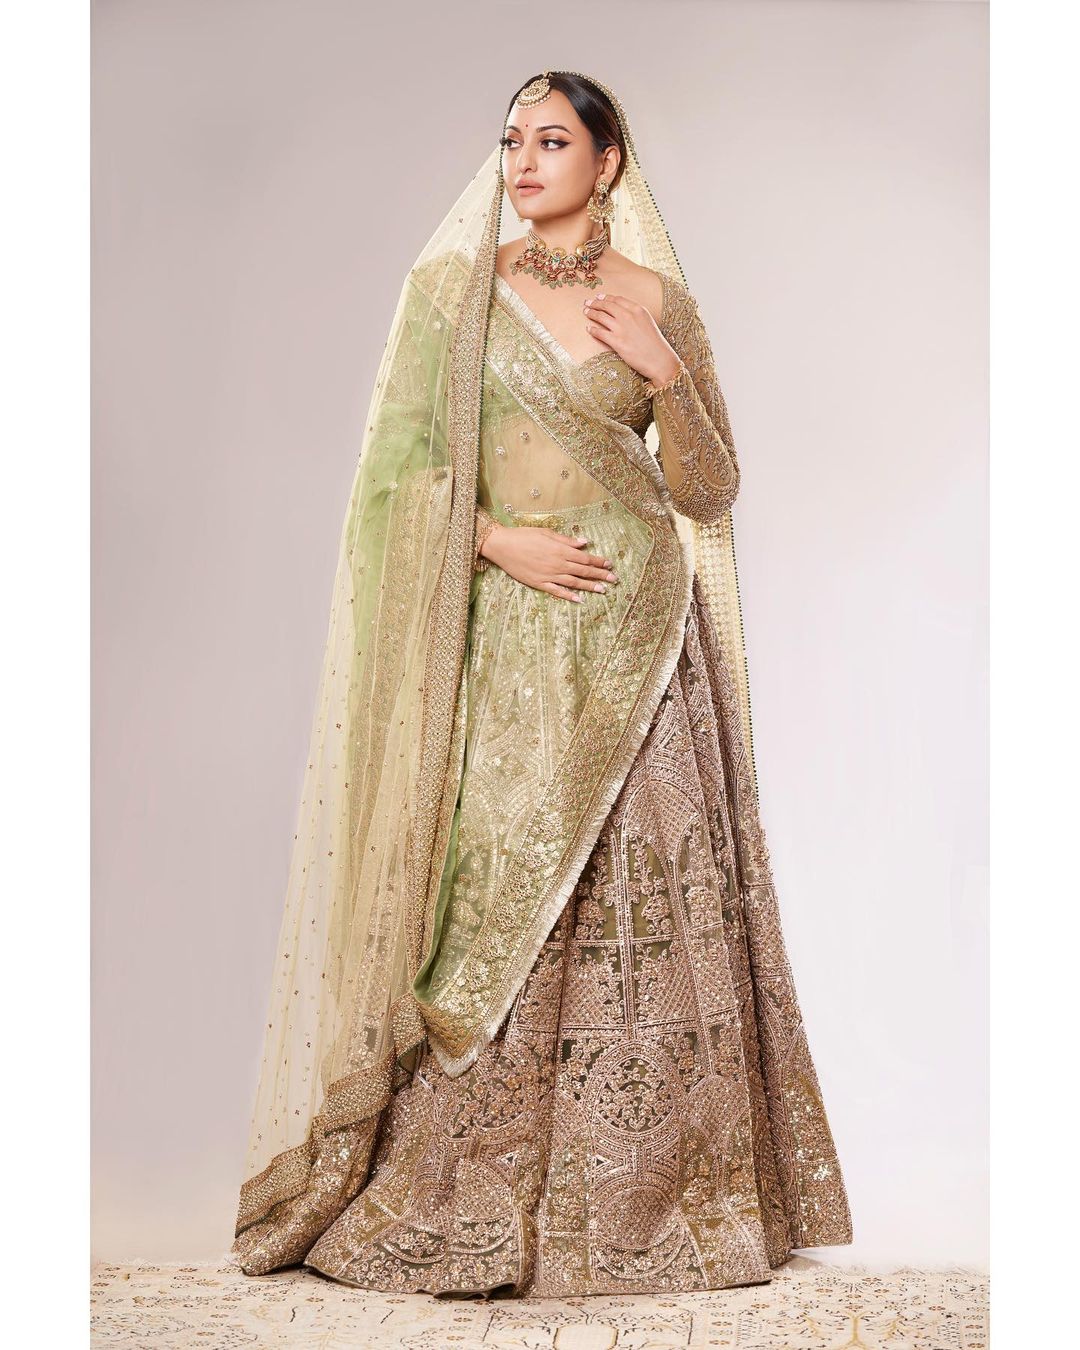 Sonakshi Sinha is attracting everyone with her unique bridal lehenga look 5857